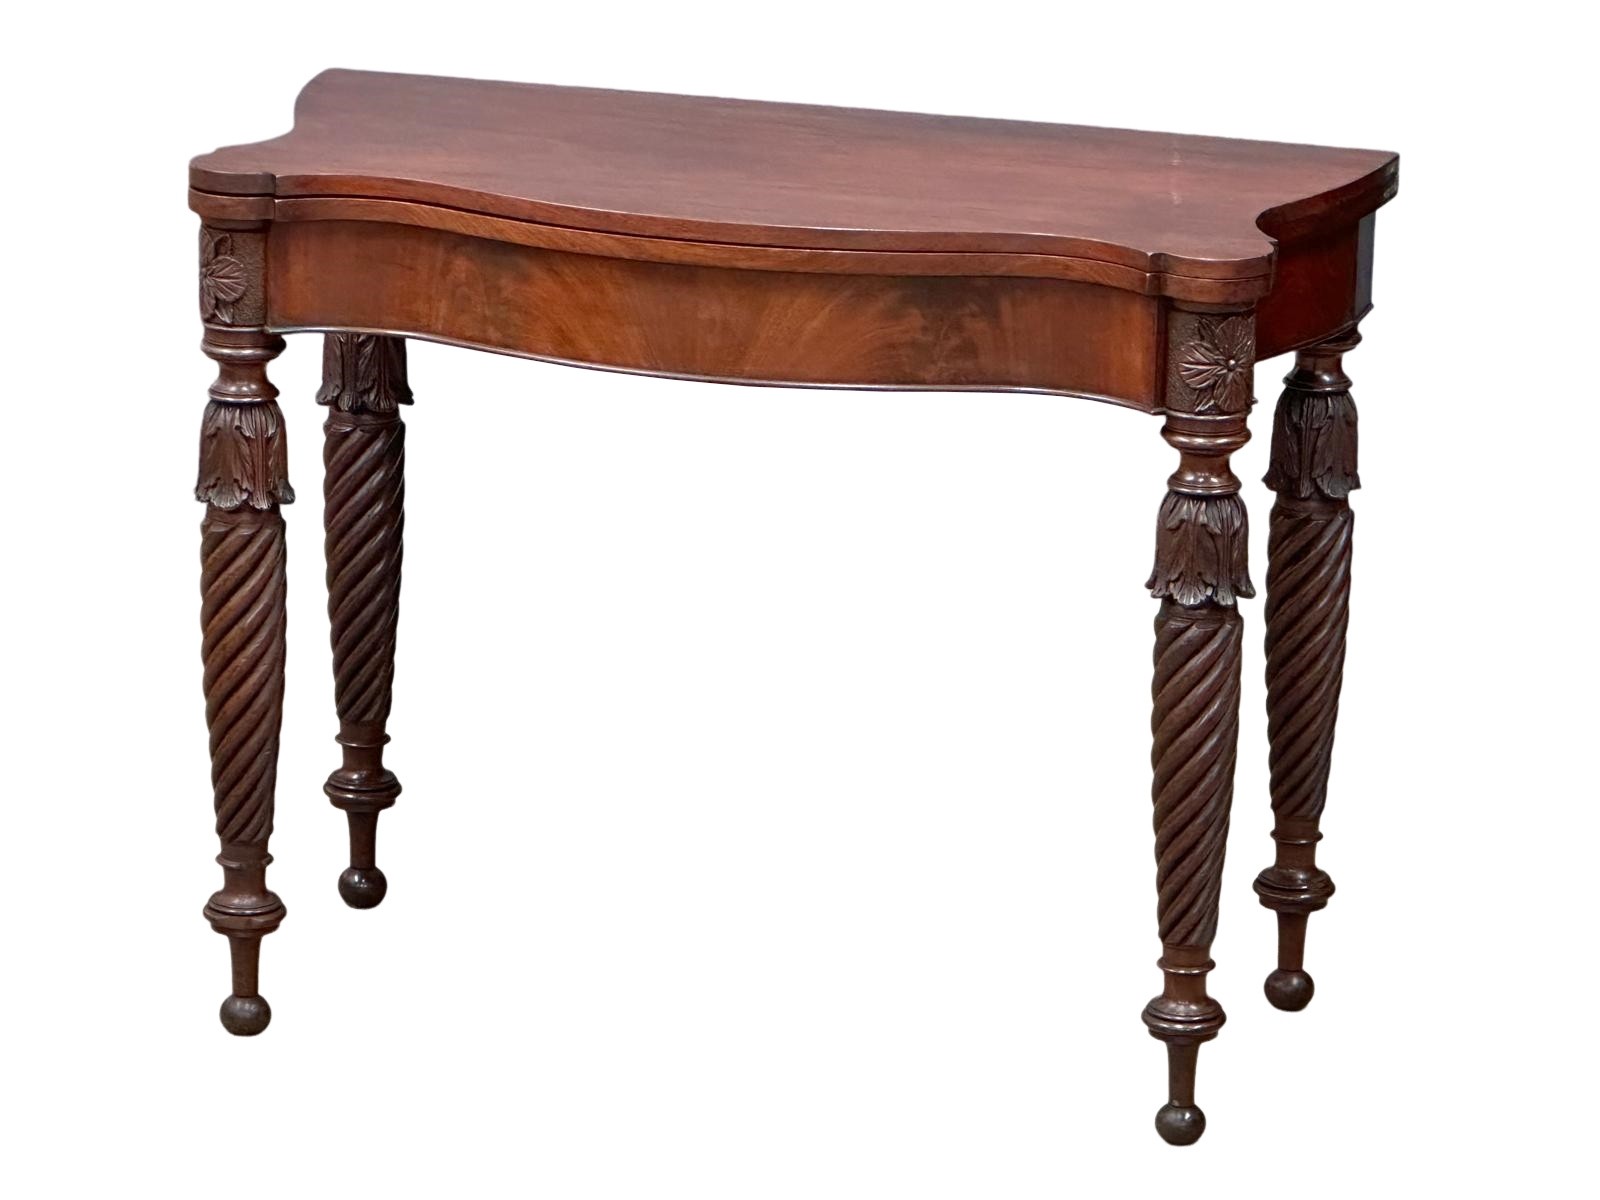 A William IV mahogany serpentine front turnover tea table on turned legs. Circa 1830. 87x44x75cm